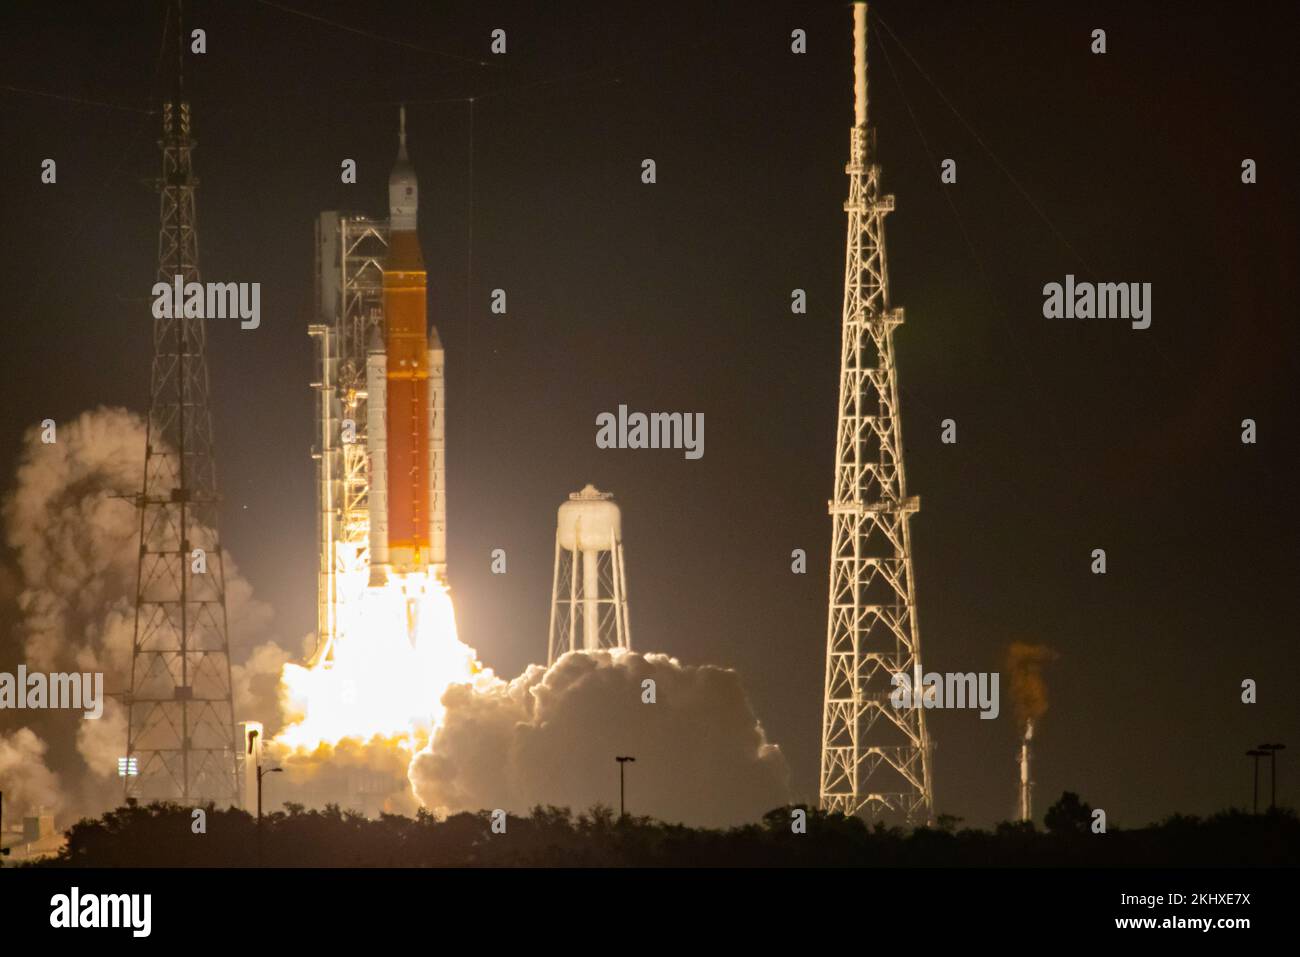 KENNEDY SPACE CENTRE, FLORIDA, USA - 16 November 2022 - Liftoff! NASA’s Space Launch System carrying the Orion spacecraft lifts off the pad at Launch Stock Photo